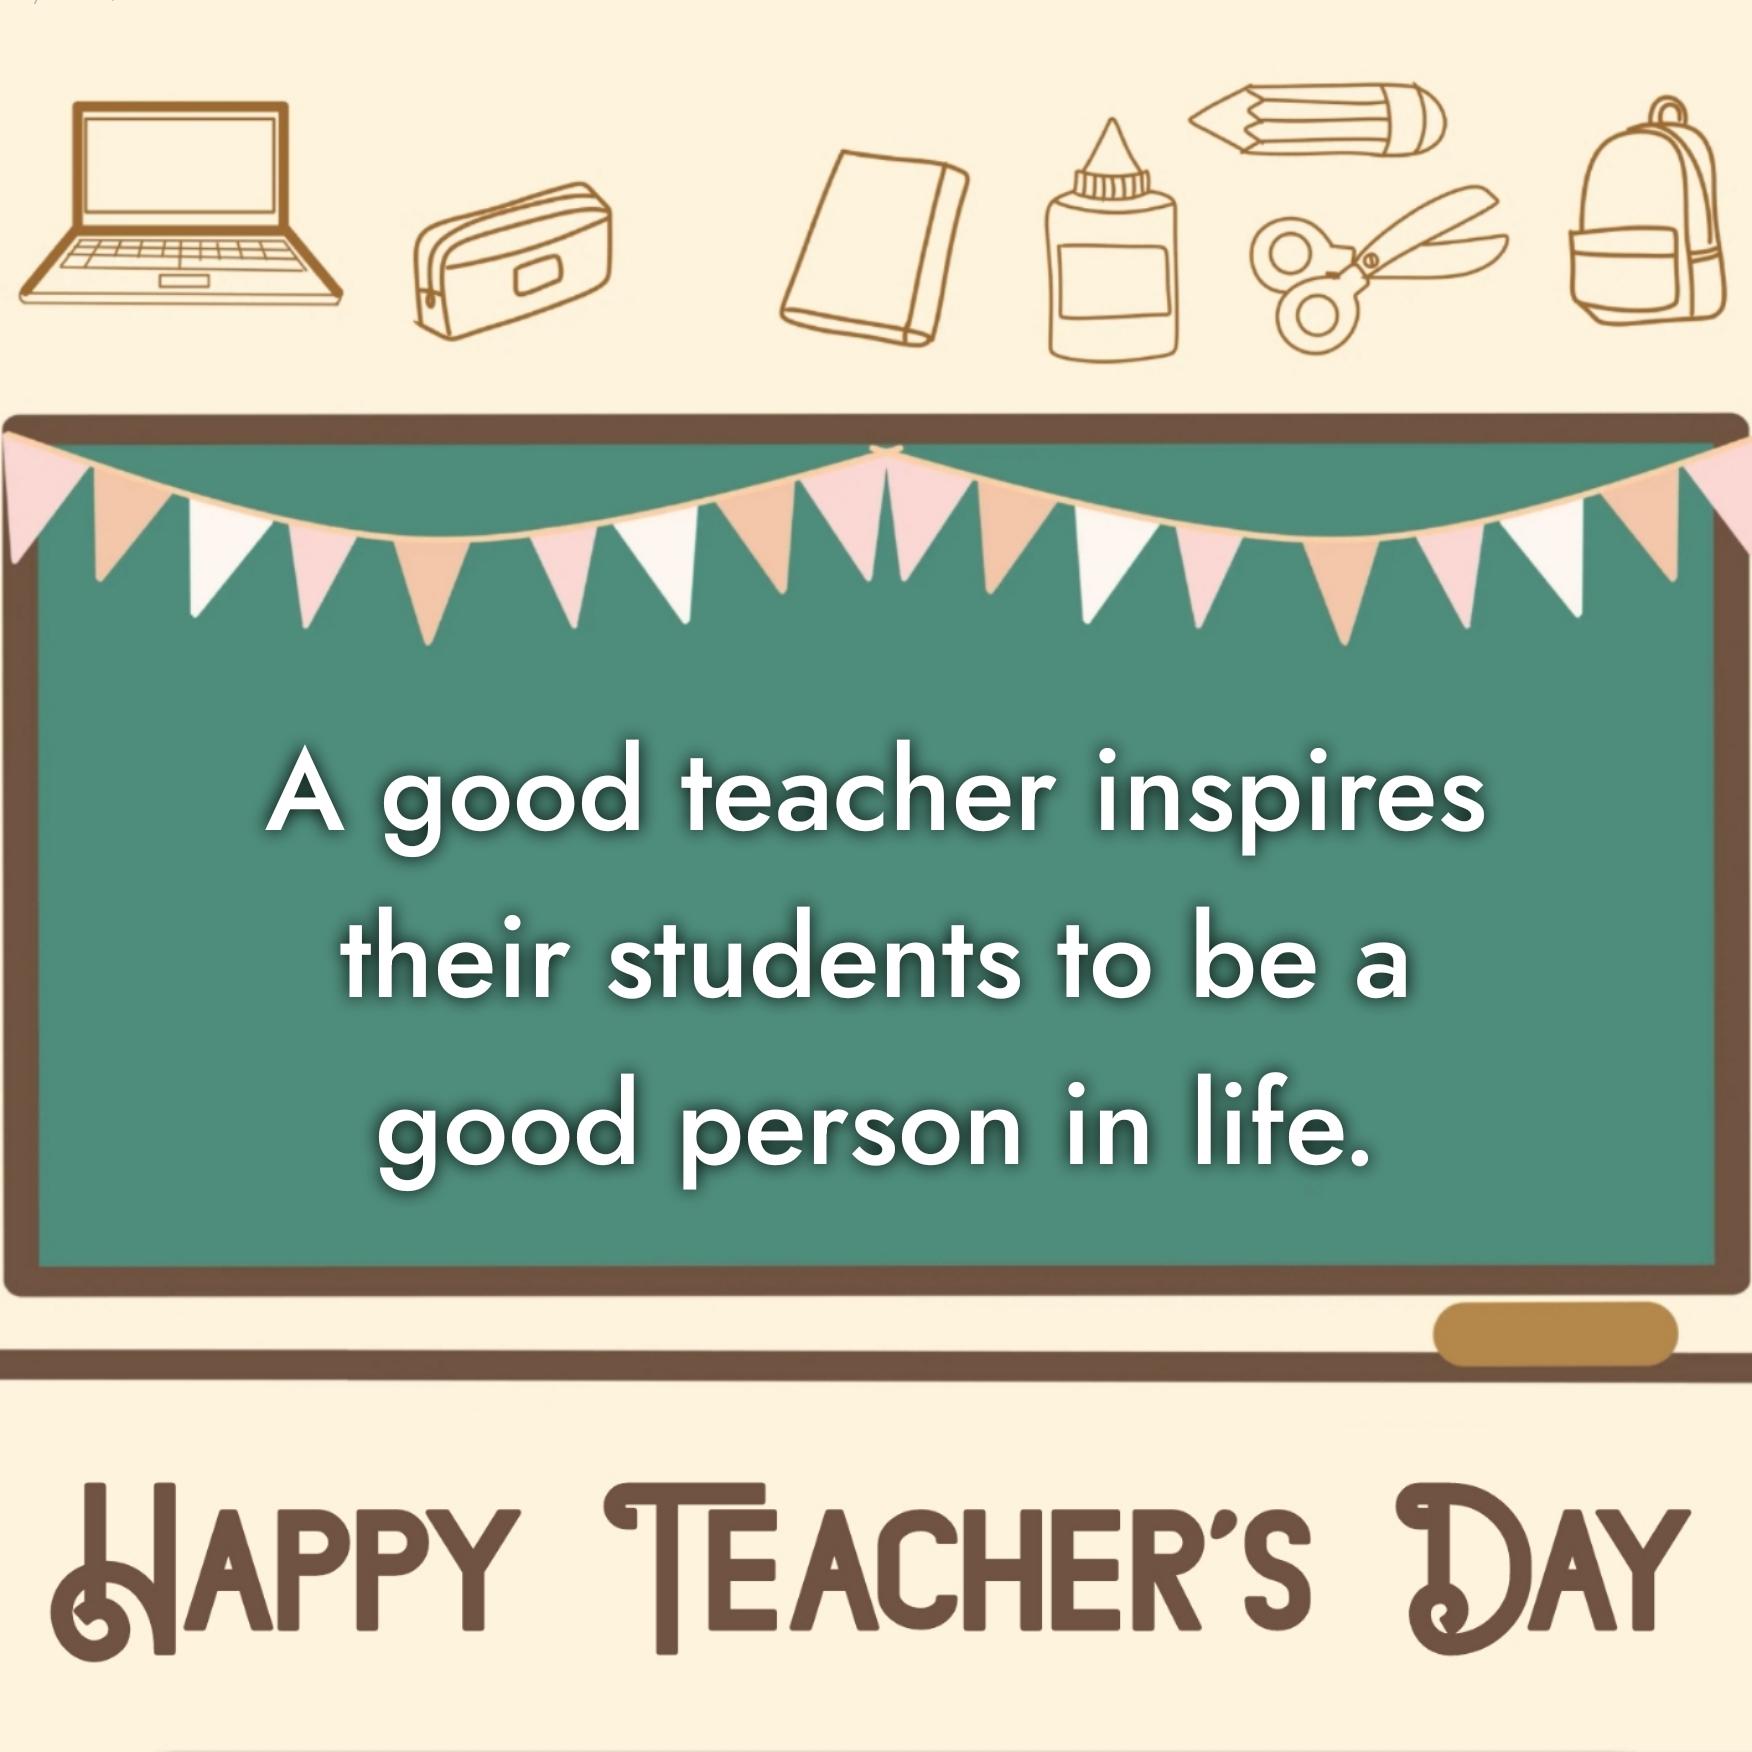 A good teacher inspires their students to be a good person